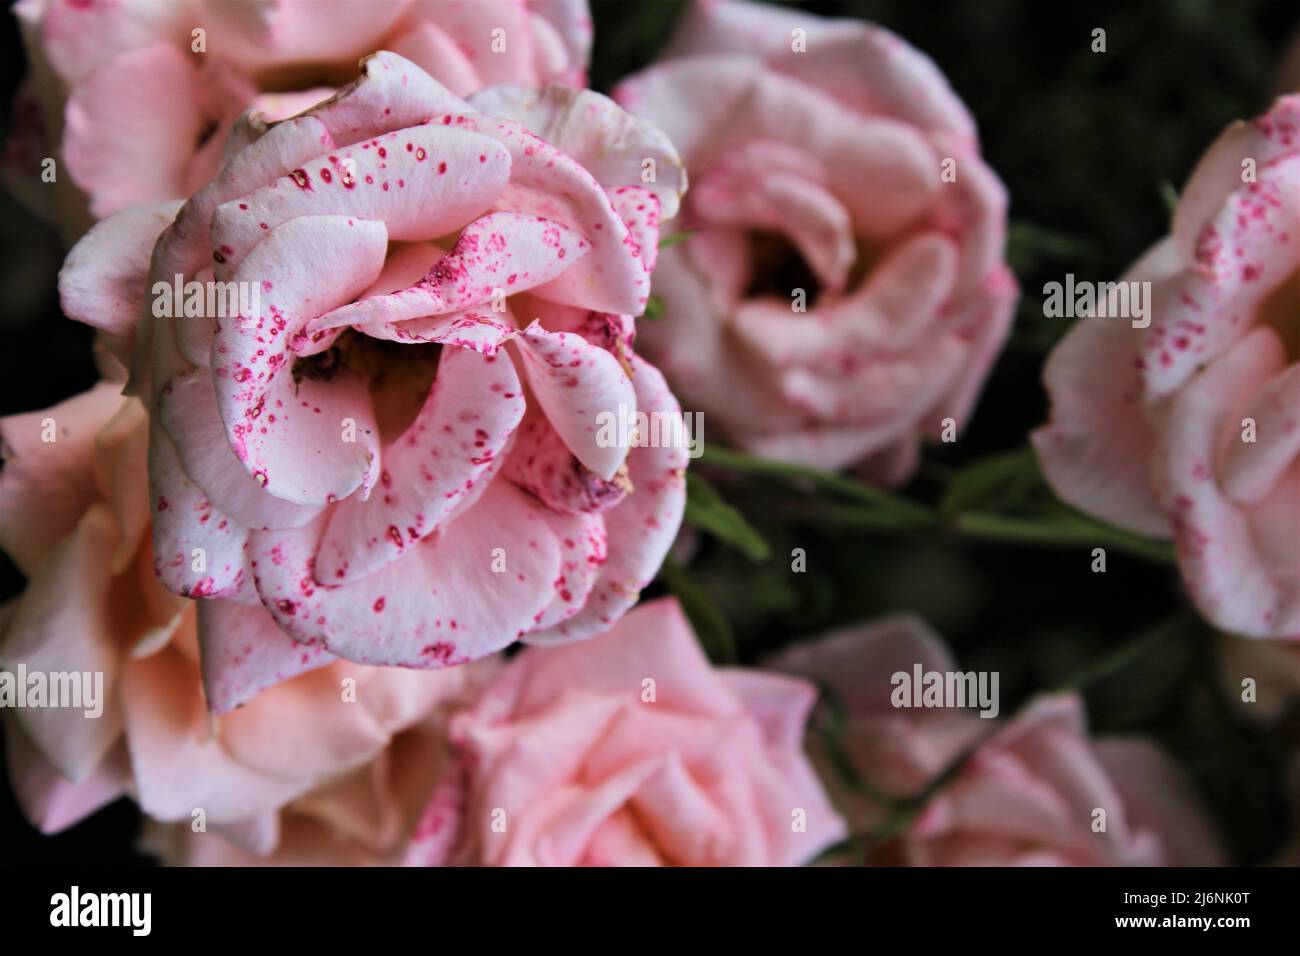 Pink roses speckled with darker pink dots - The result of a rose being infected with the fungal disease Botrytis cinerea. Stock Photo